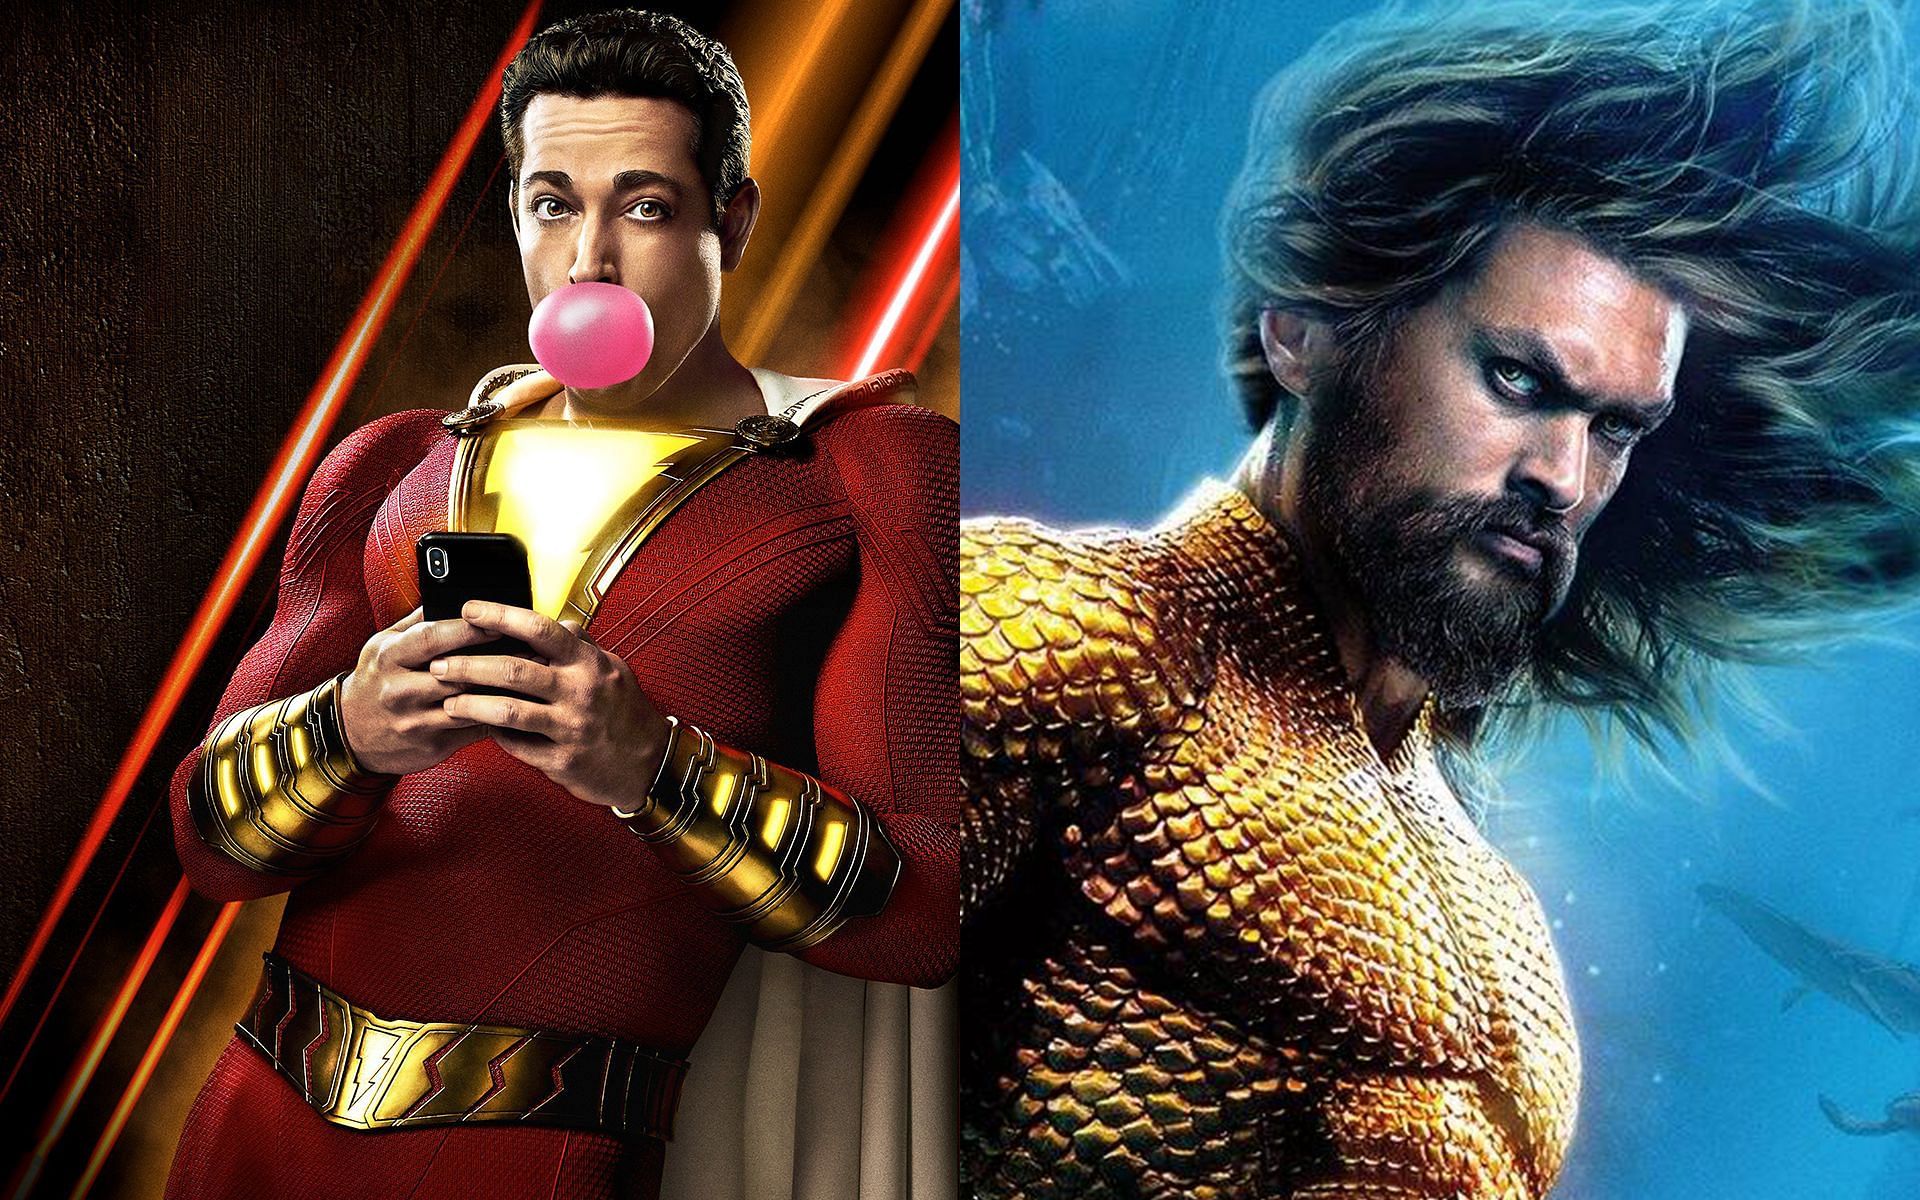 The release date for Shazam 2 has been pushed forward by six months, pushing back movies like The Flash, Black Adam, and Aquaman 2. (Image via IMDb)